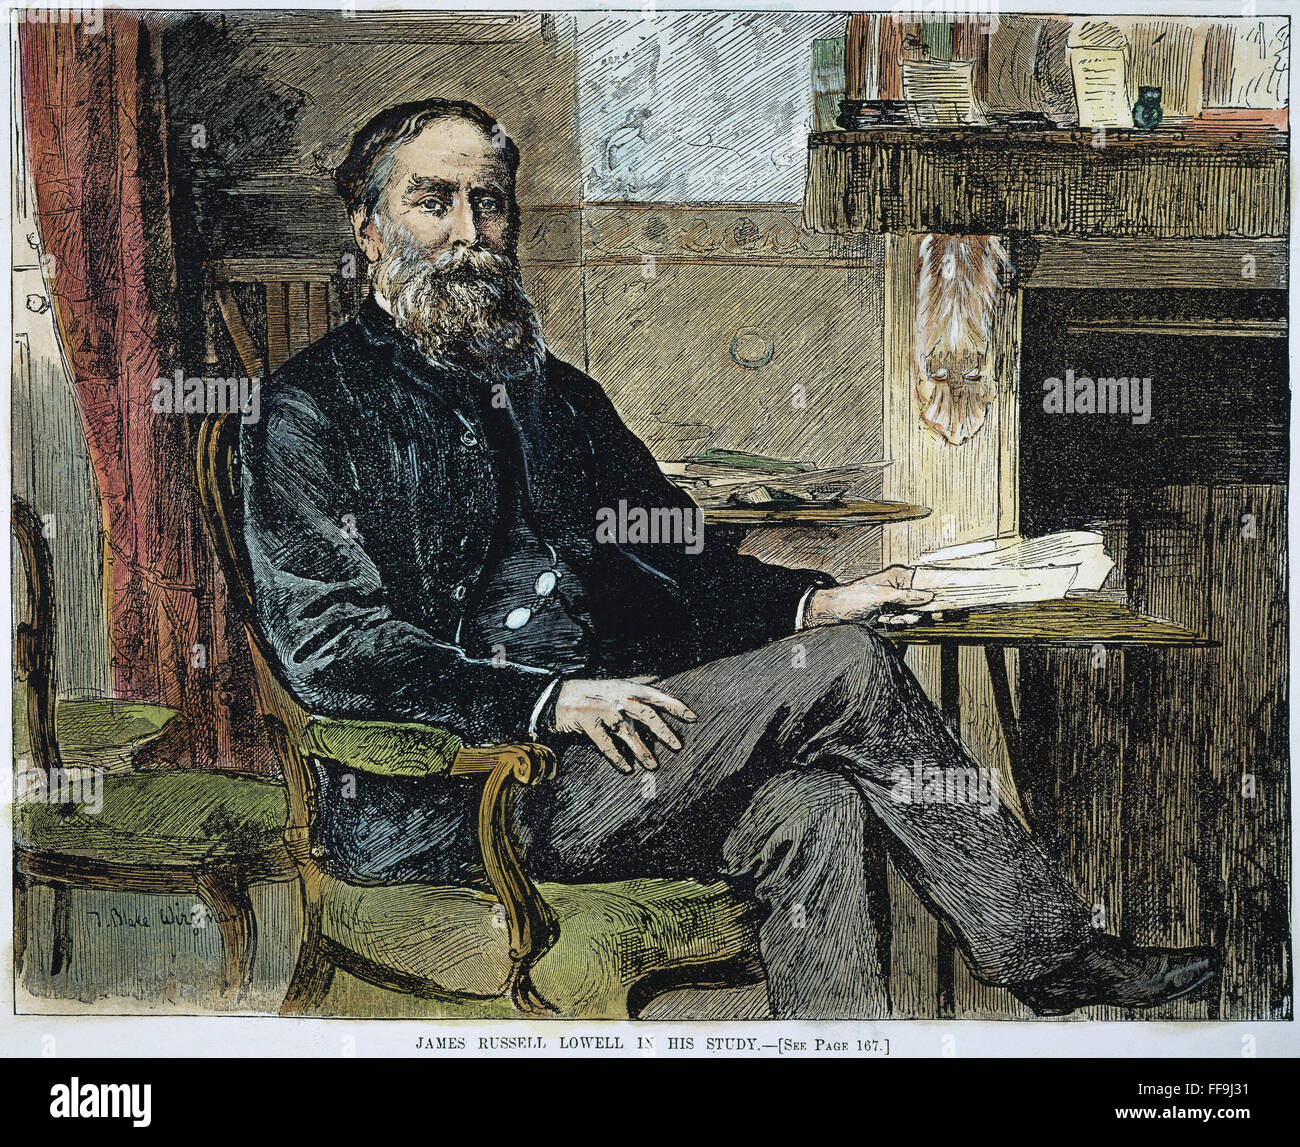 JAMES RUSSELL LOWELL /n(1819-1891). American poet, essayist, and diplomat. Wood engraving, 1887. Stock Photo